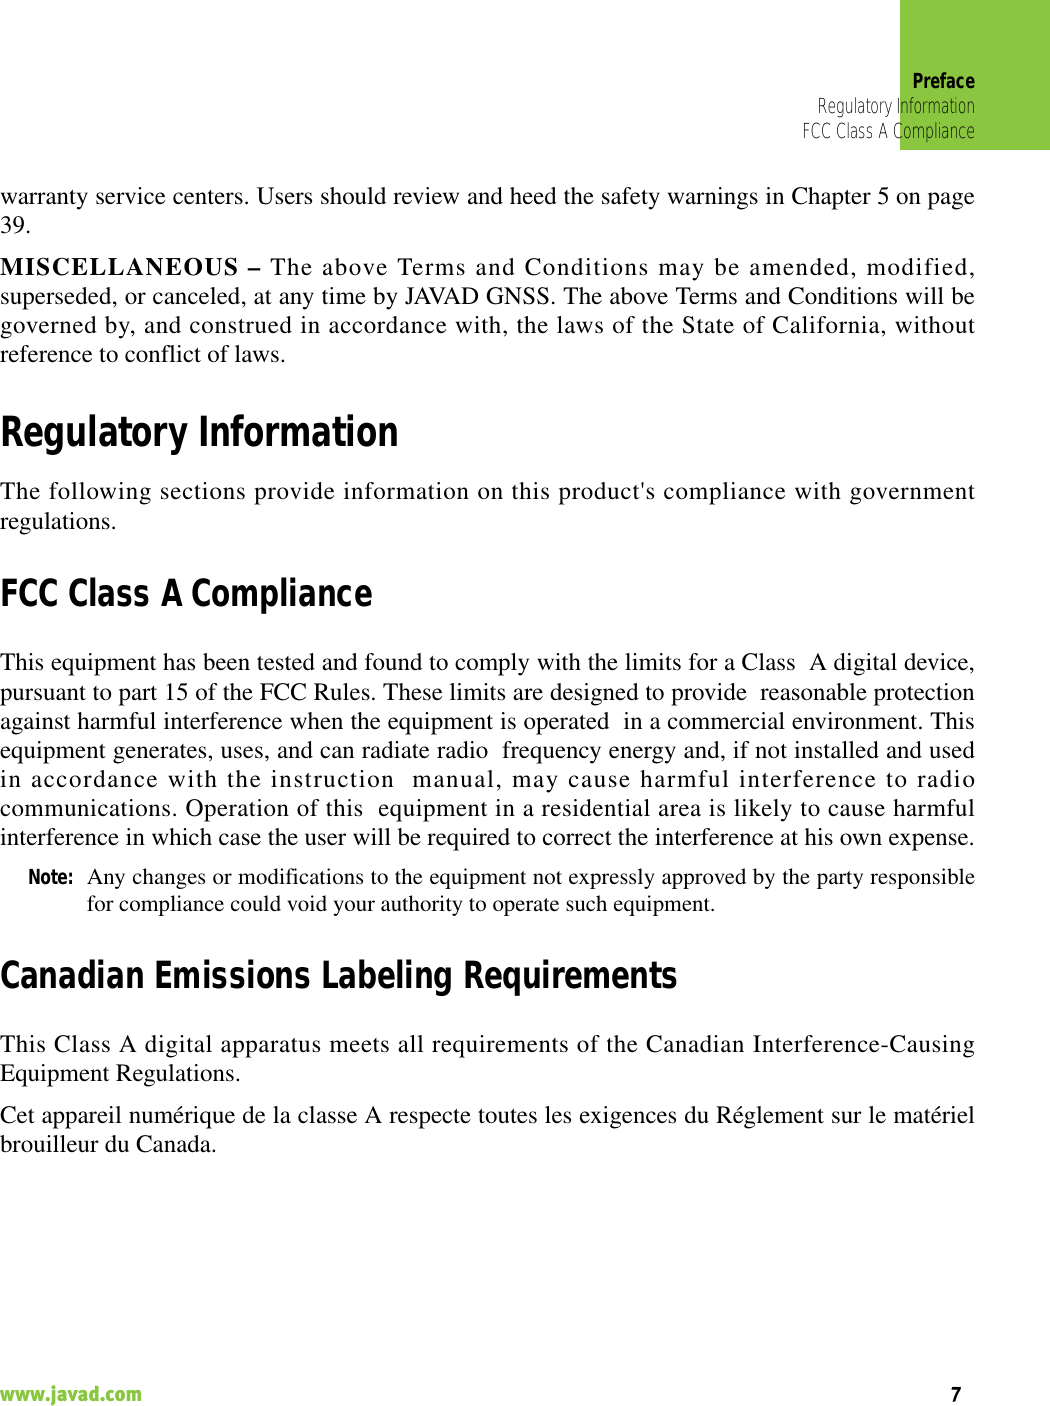 PrefaceRegulatory InformationFCC Class A Compliance7www.javad.com                                                                                                                                                    warranty service centers. Users should review and heed the safety warnings in Chapter 5 on page39.MISCELLANEOUS – The above Terms and Conditions may be amended, modified,superseded, or canceled, at any time by JAVAD GNSS. The above Terms and Conditions will begoverned by, and construed in accordance with, the laws of the State of California, withoutreference to conflict of laws.Regulatory InformationThe following sections provide information on this product&apos;s compliance with governmentregulations.FCC Class A ComplianceThis equipment has been tested and found to comply with the limits for a Class  A digital device,pursuant to part 15 of the FCC Rules. These limits are designed to provide  reasonable protectionagainst harmful interference when the equipment is operated  in a commercial environment. Thisequipment generates, uses, and can radiate radio  frequency energy and, if not installed and usedin accordance with the instruction  manual, may cause harmful interference to radiocommunications. Operation of this  equipment in a residential area is likely to cause harmfulinterference in which case the user will be required to correct the interference at his own expense.Note: Any changes or modifications to the equipment not expressly approved by the party responsiblefor compliance could void your authority to operate such equipment.Canadian Emissions Labeling RequirementsThis Class A digital apparatus meets all requirements of the Canadian Interference-CausingEquipment Regulations.Cet appareil numérique de la classe A respecte toutes les exigences du Réglement sur le matérielbrouilleur du Canada.